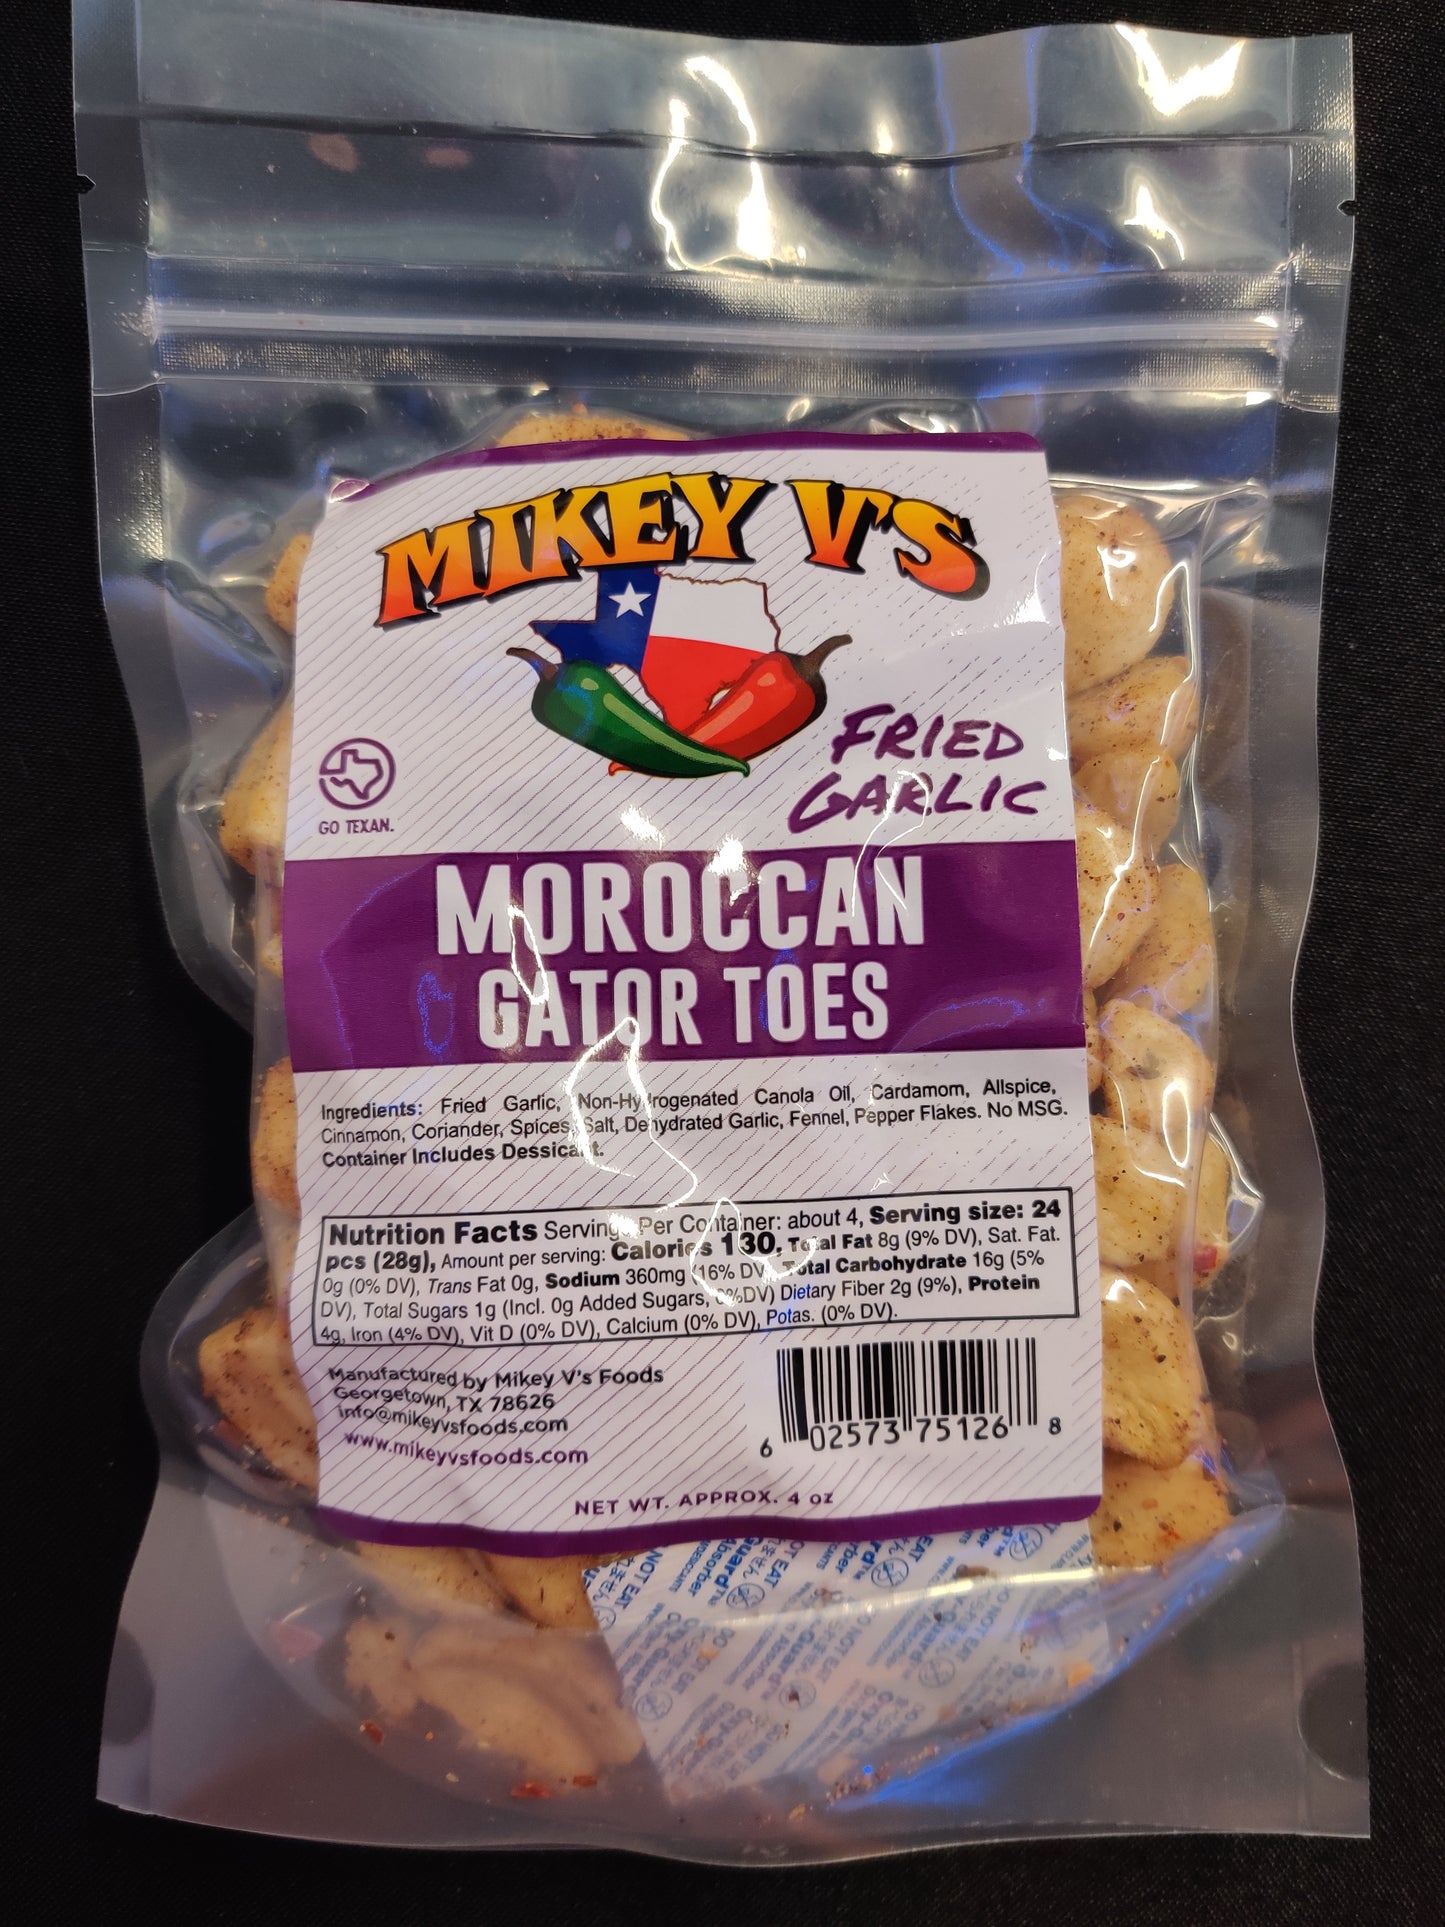 Mikey V's - Gator Toes - Moroccan